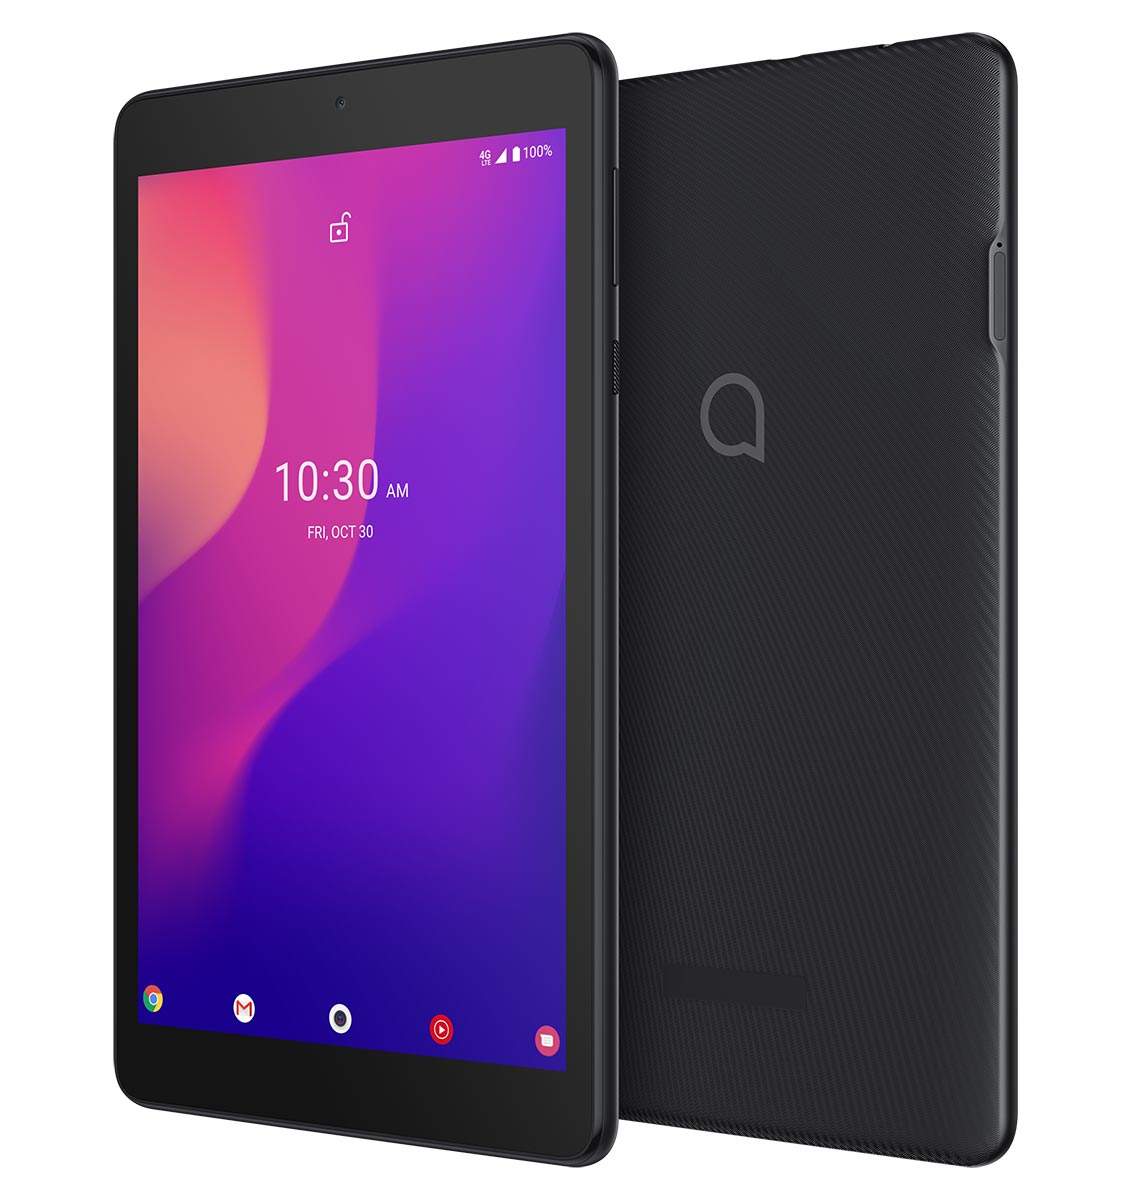 alcatel-joy-tab-2-launches-at-metro-by-t-mobile-with-50-off-deal-tmonews